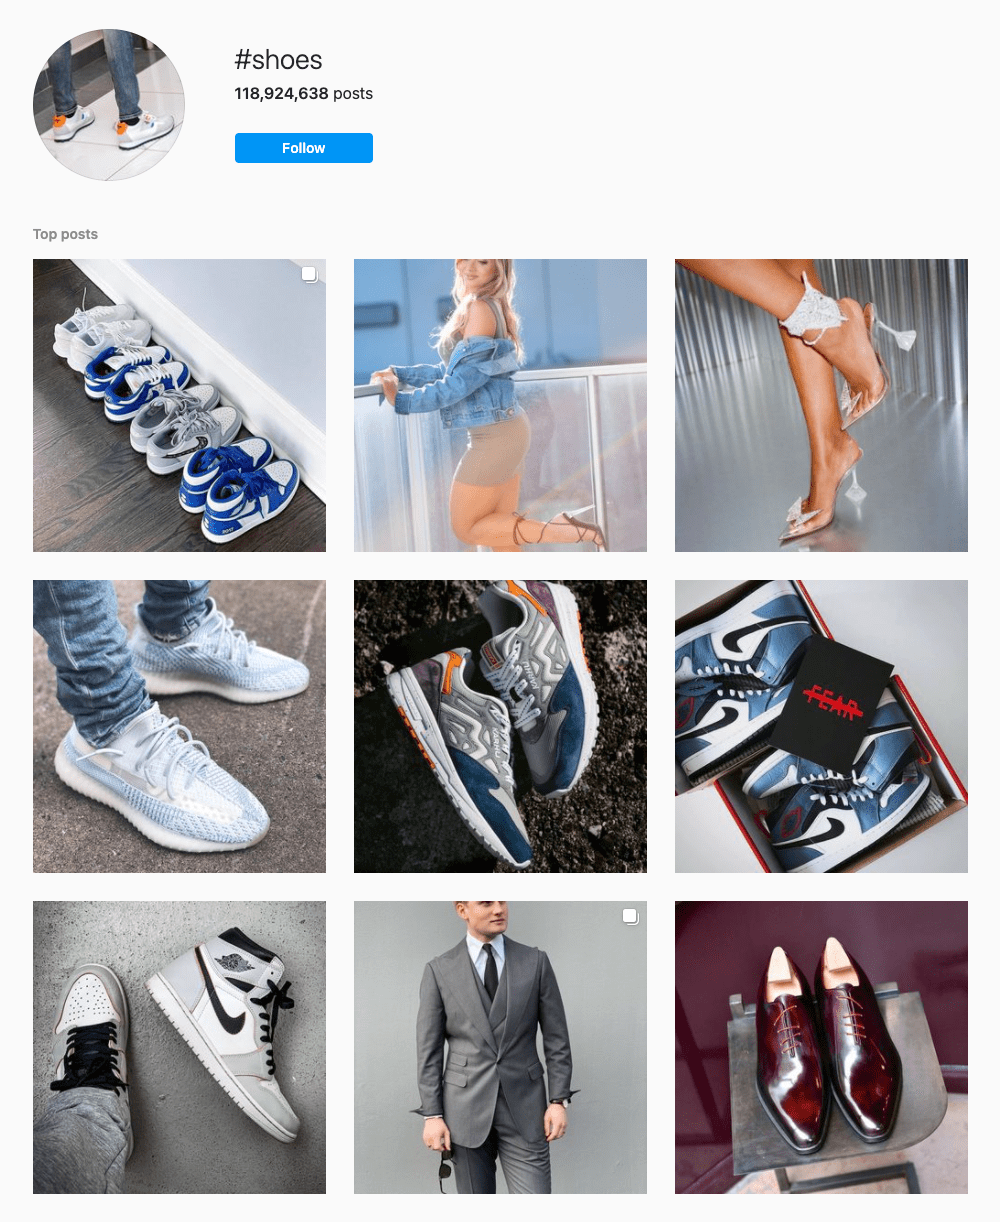 #shoes Hashtags for Instagram